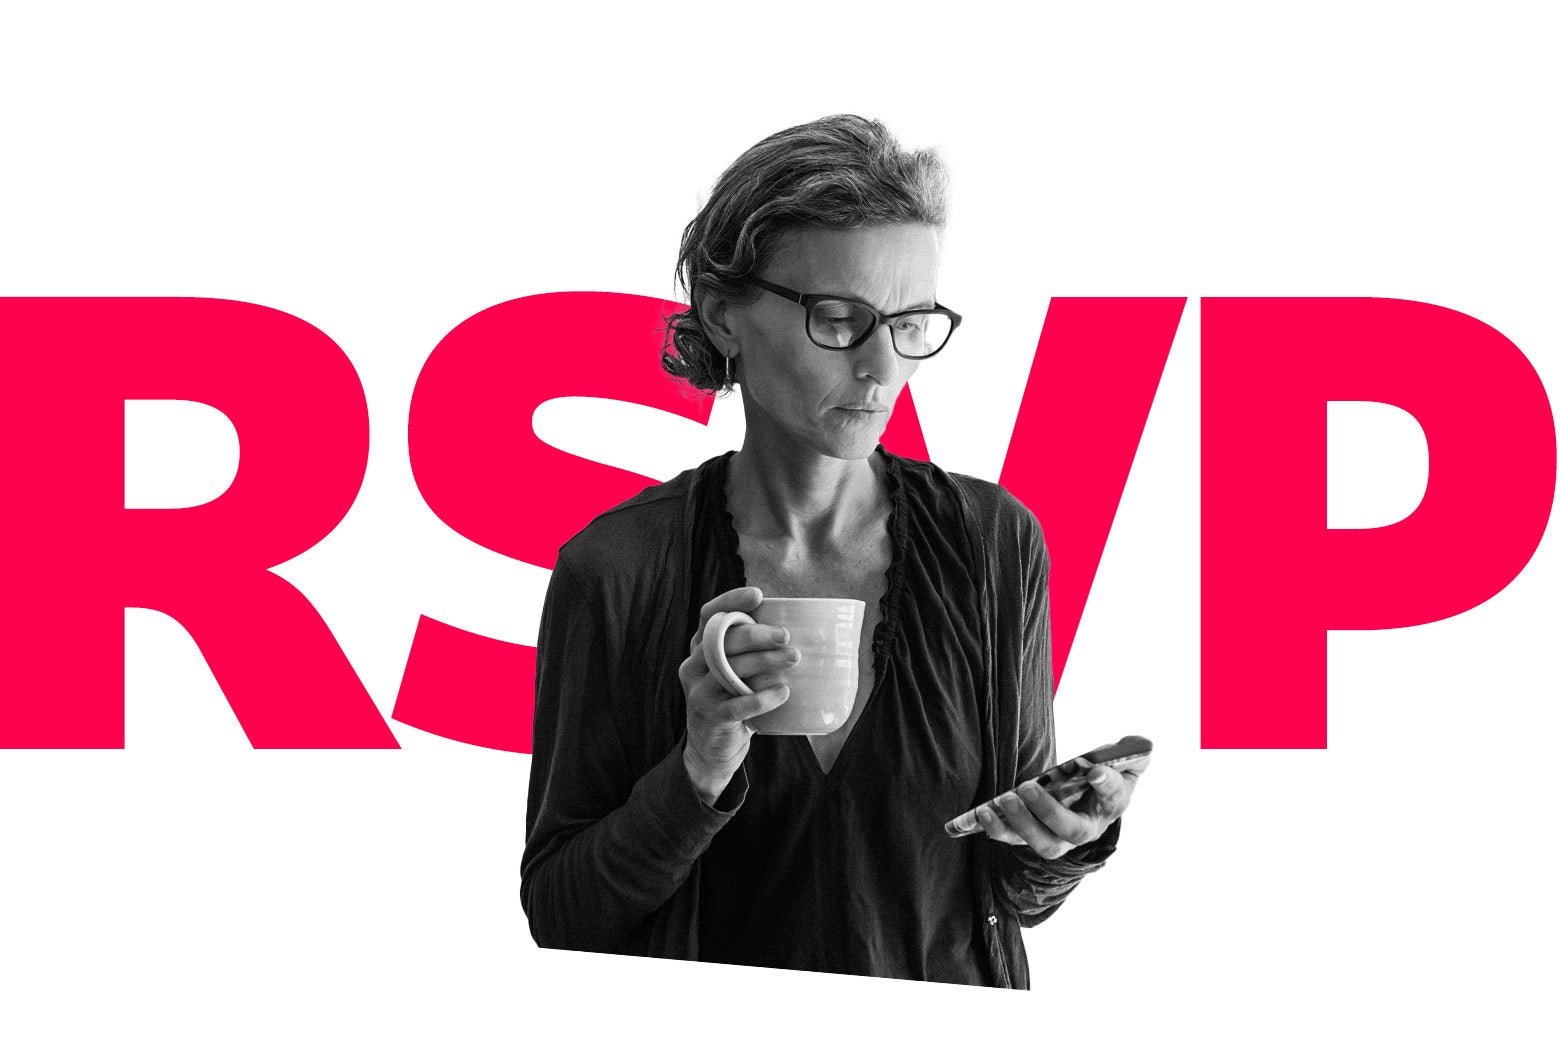 Woman looking at a cellphone and holding a mug with the letters "RSVP" behind her